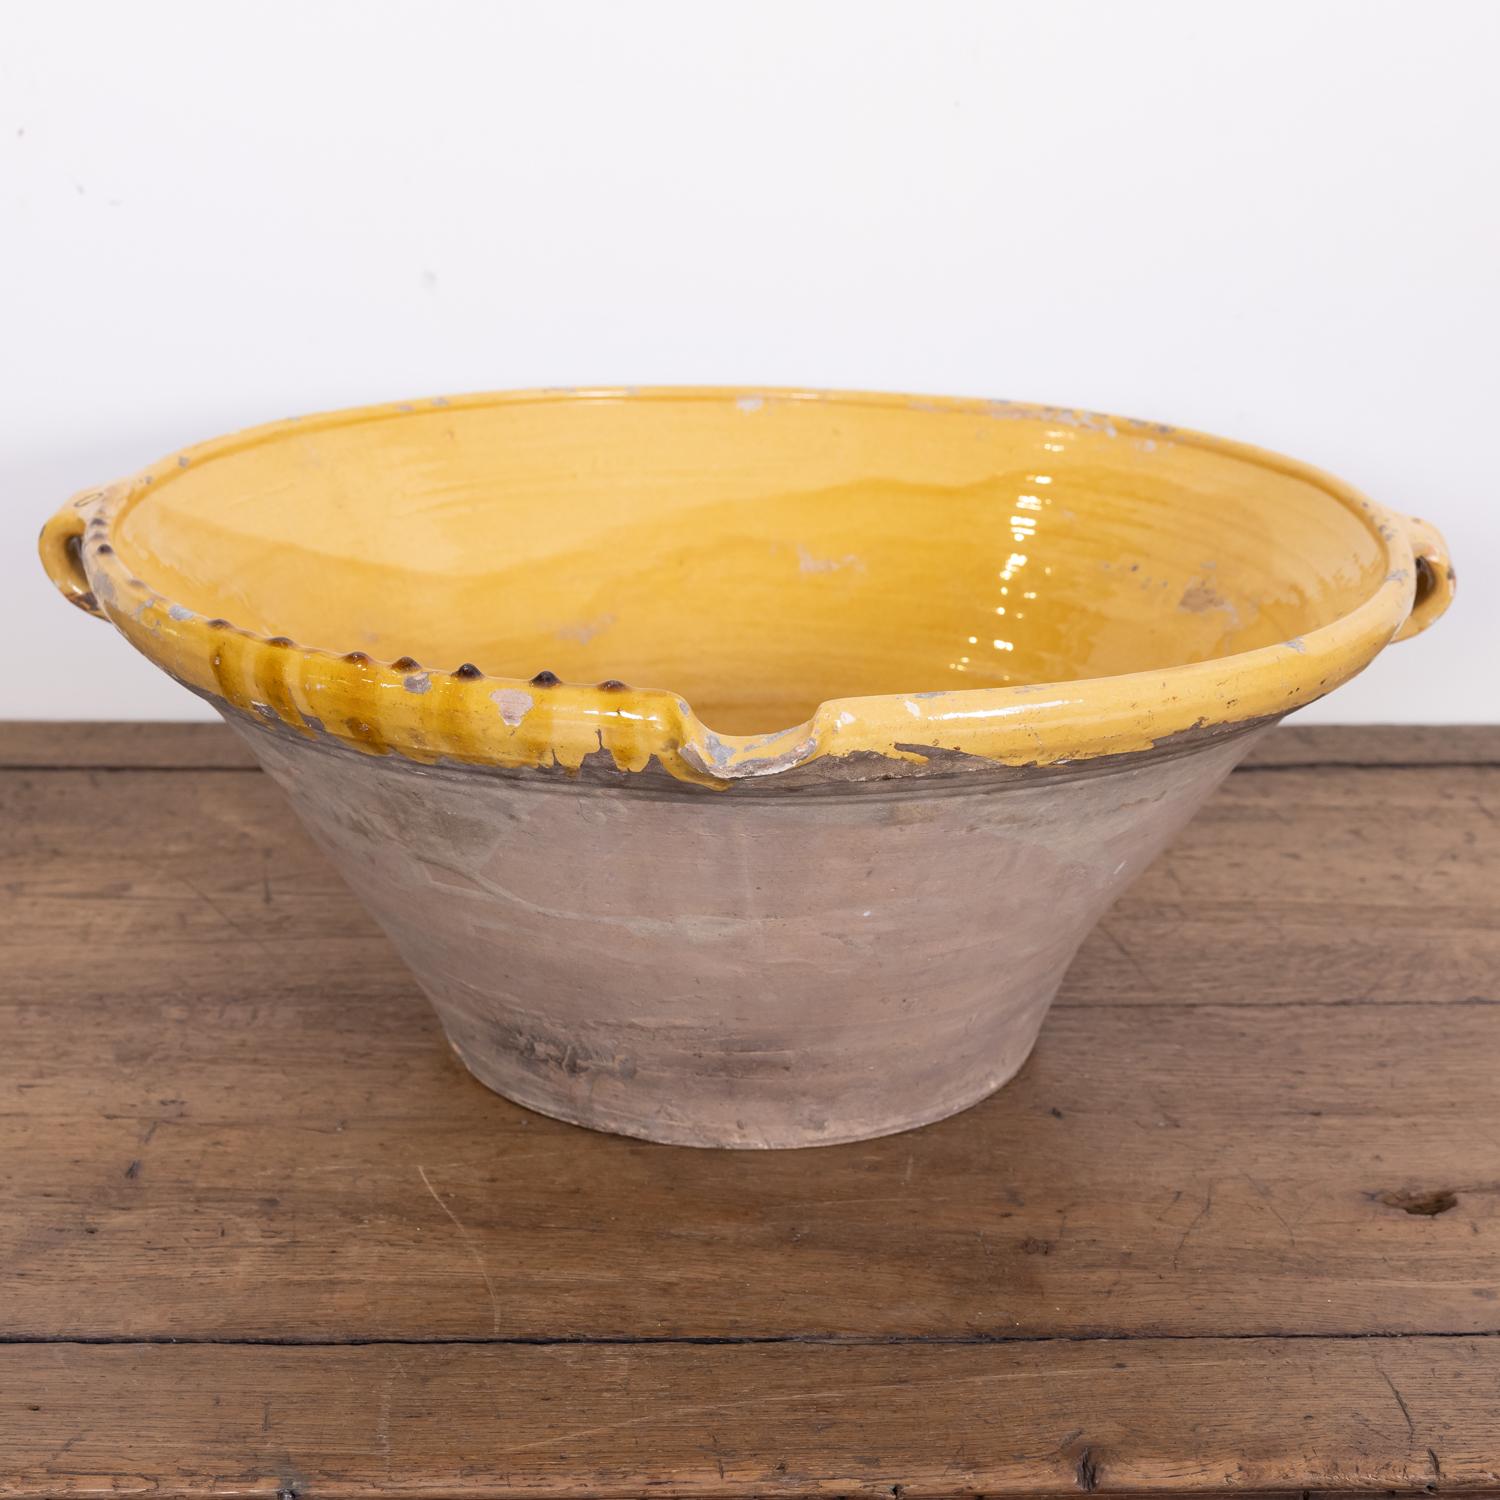 A large 19th century French tian bowl complete with both handles and pouring spout having an unglazed pale terracotta exterior and a bright yellow glaze to the interior and lip, circa 1880s. Earthernware tian bowls like this are considered